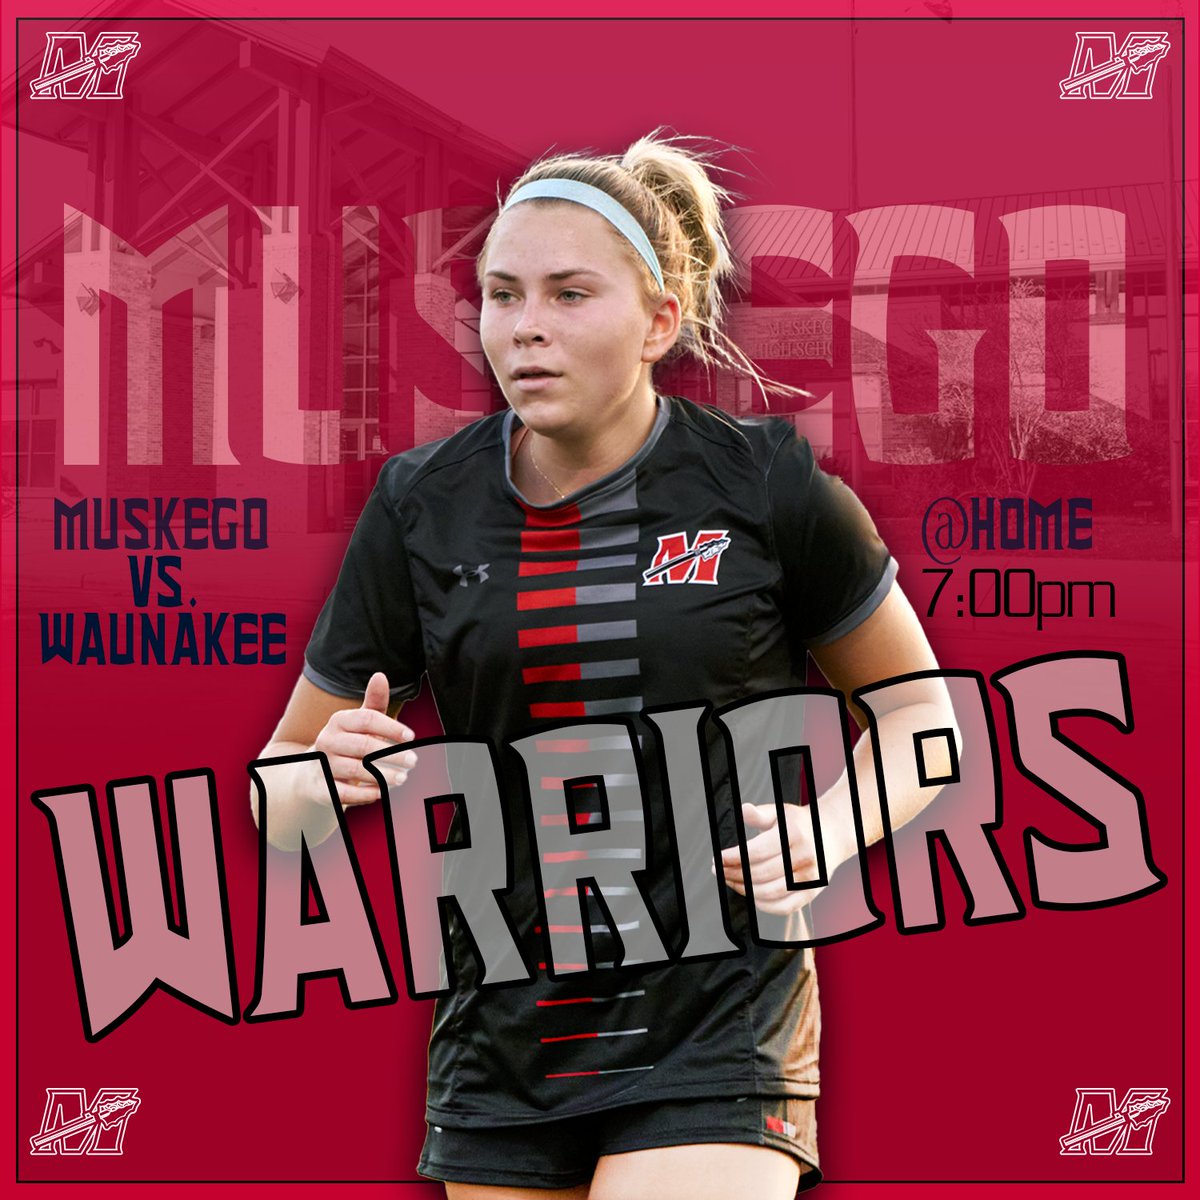 Come out and support our girls Varsity soccer team as they face Waunakee @ Home. Kick off starts at 7:00pm, don't miss it!! #mhs #warriornation #wisconsin #1warrior @MHSIrvine @MHSTheme @MuskegoNorwaySc